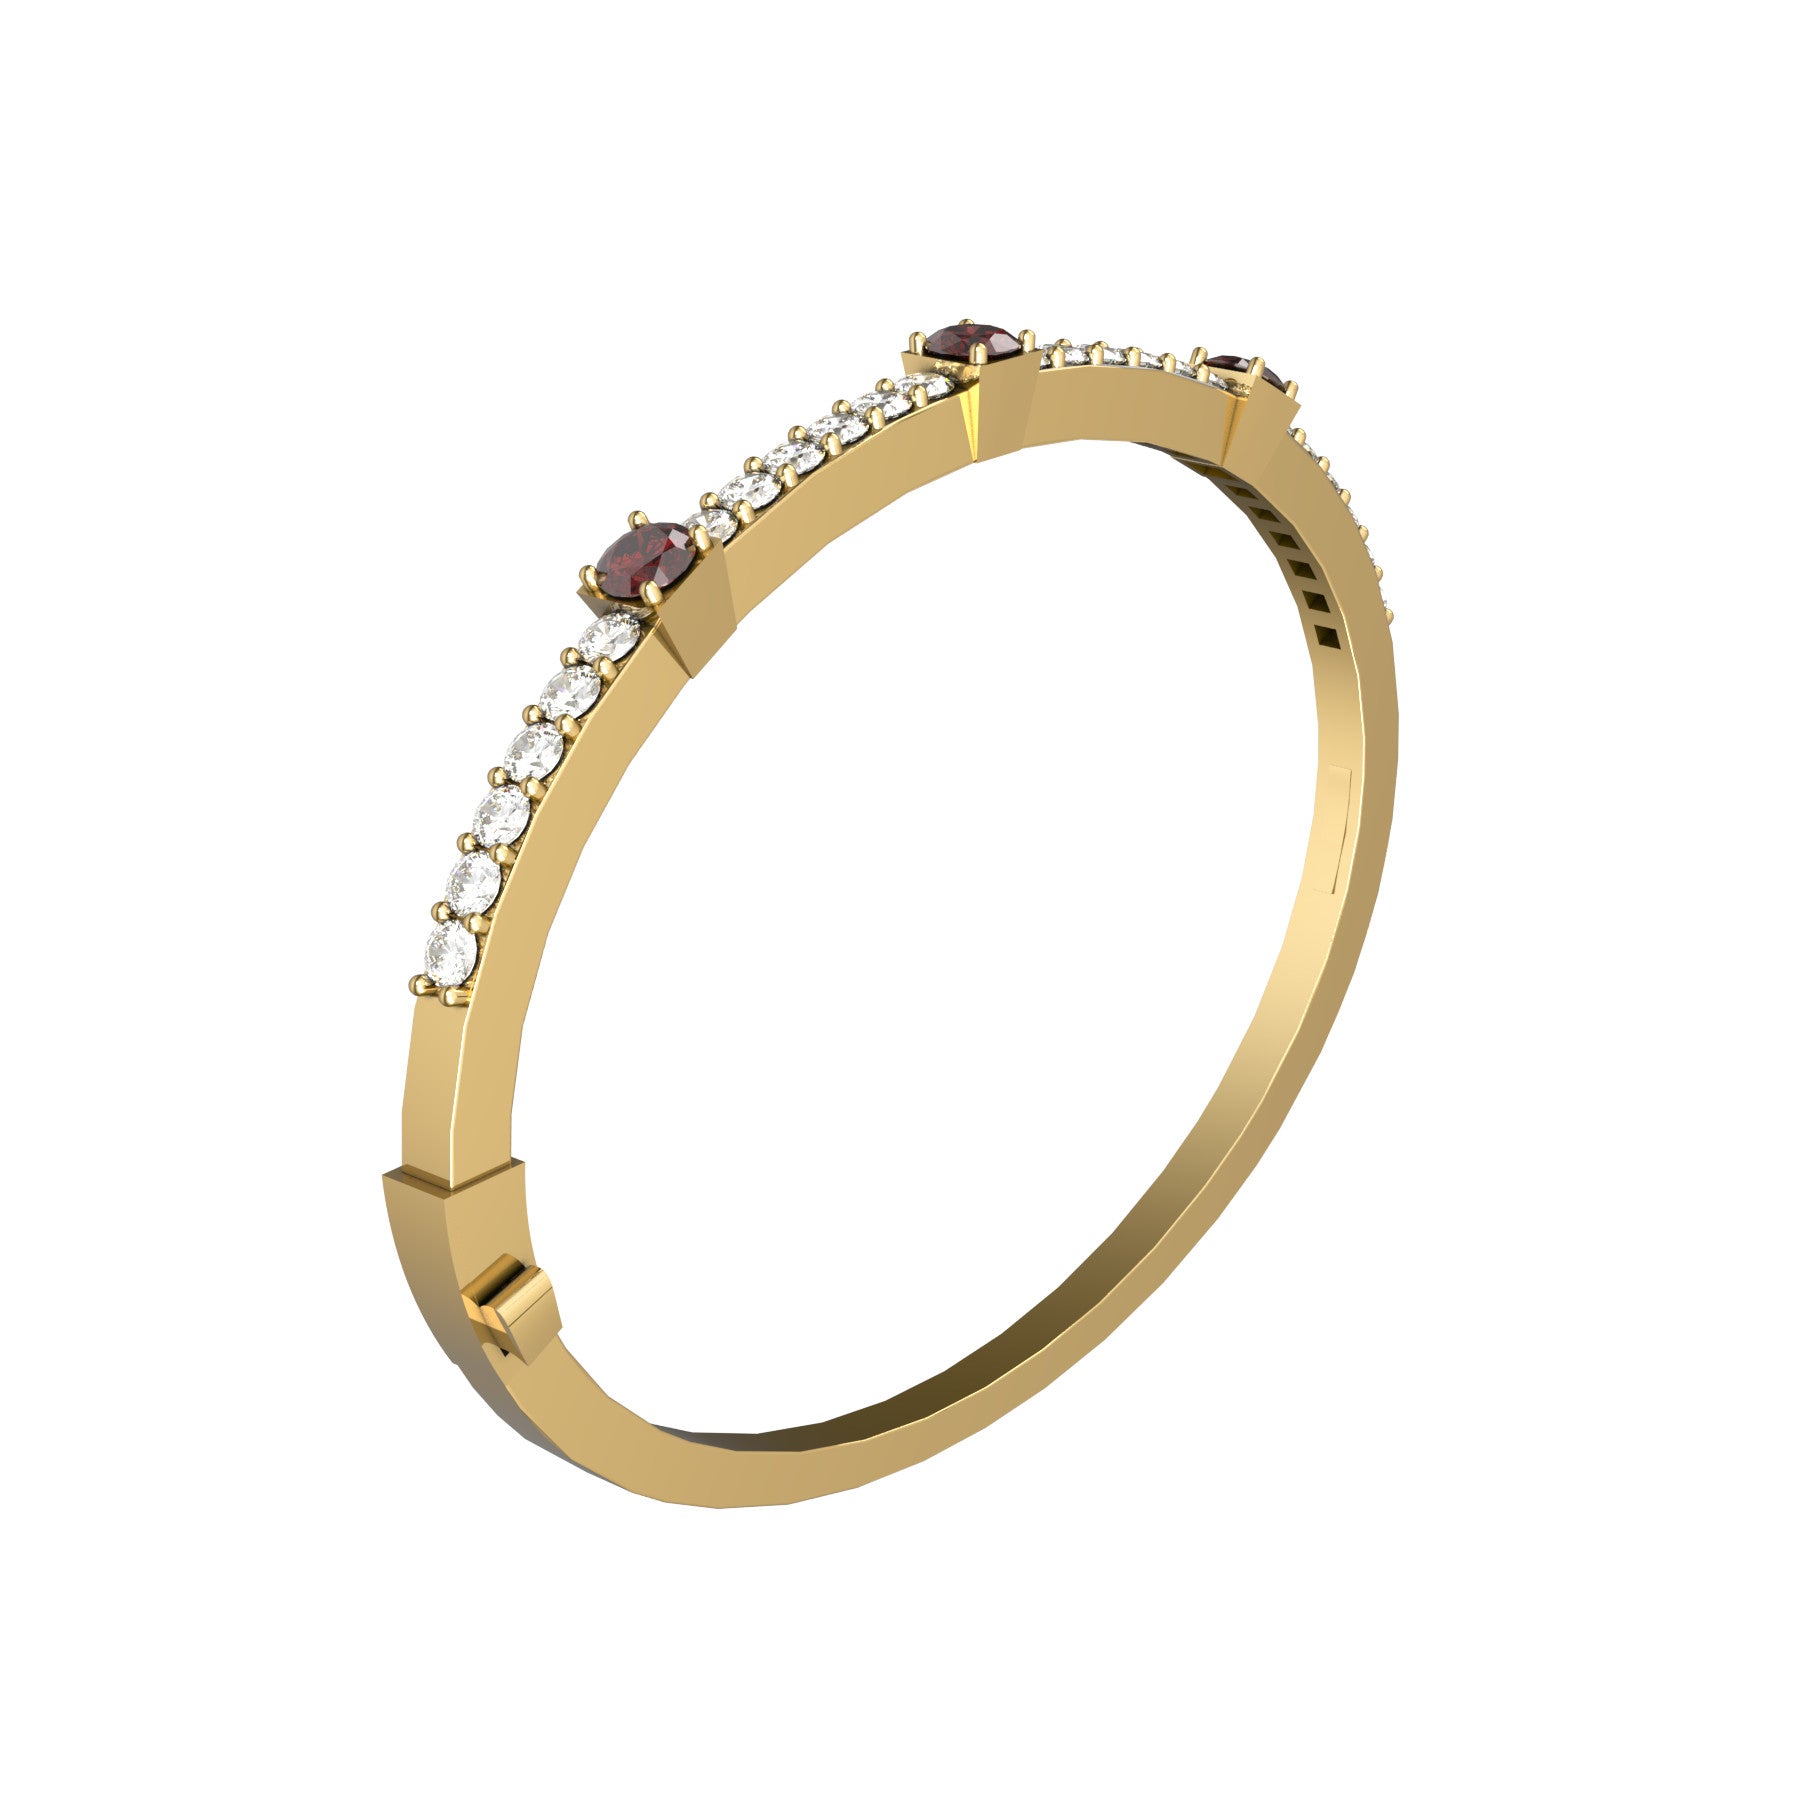 vesper rigid bracelet, natural round rubies, natural round diamonds, 18 K yellow gold, weight  about 15,0 to 32,4 g (0.53 to 1.14 oz); width 4,0 mm max